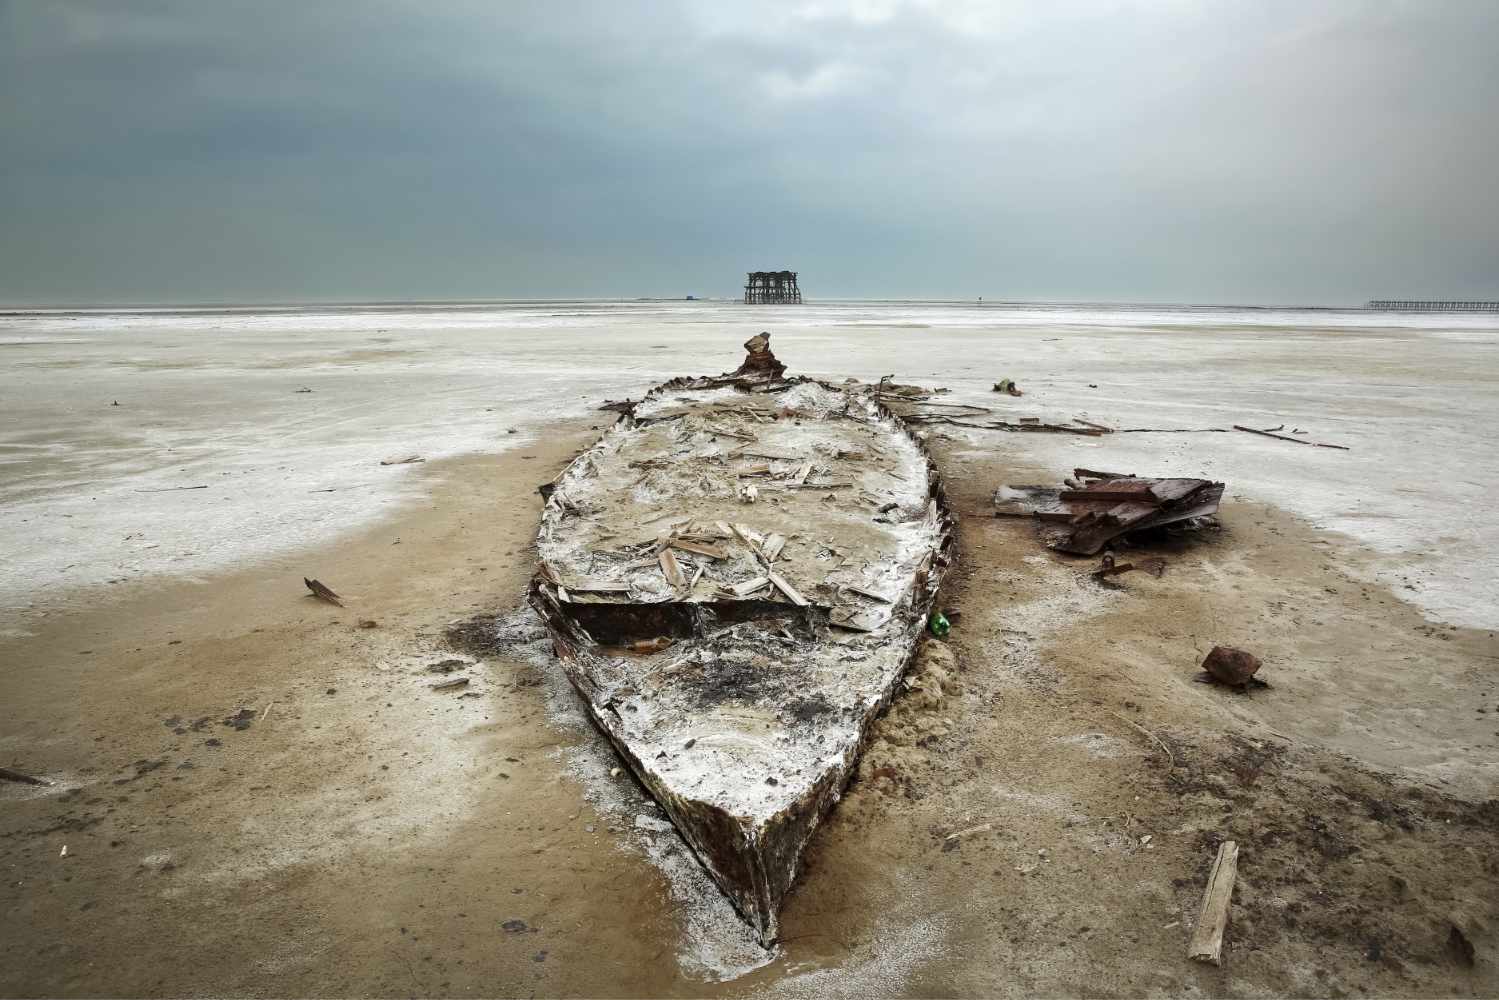 Photograph showing the frame of a rotting boat embedded in the sand of a dry lake bed.